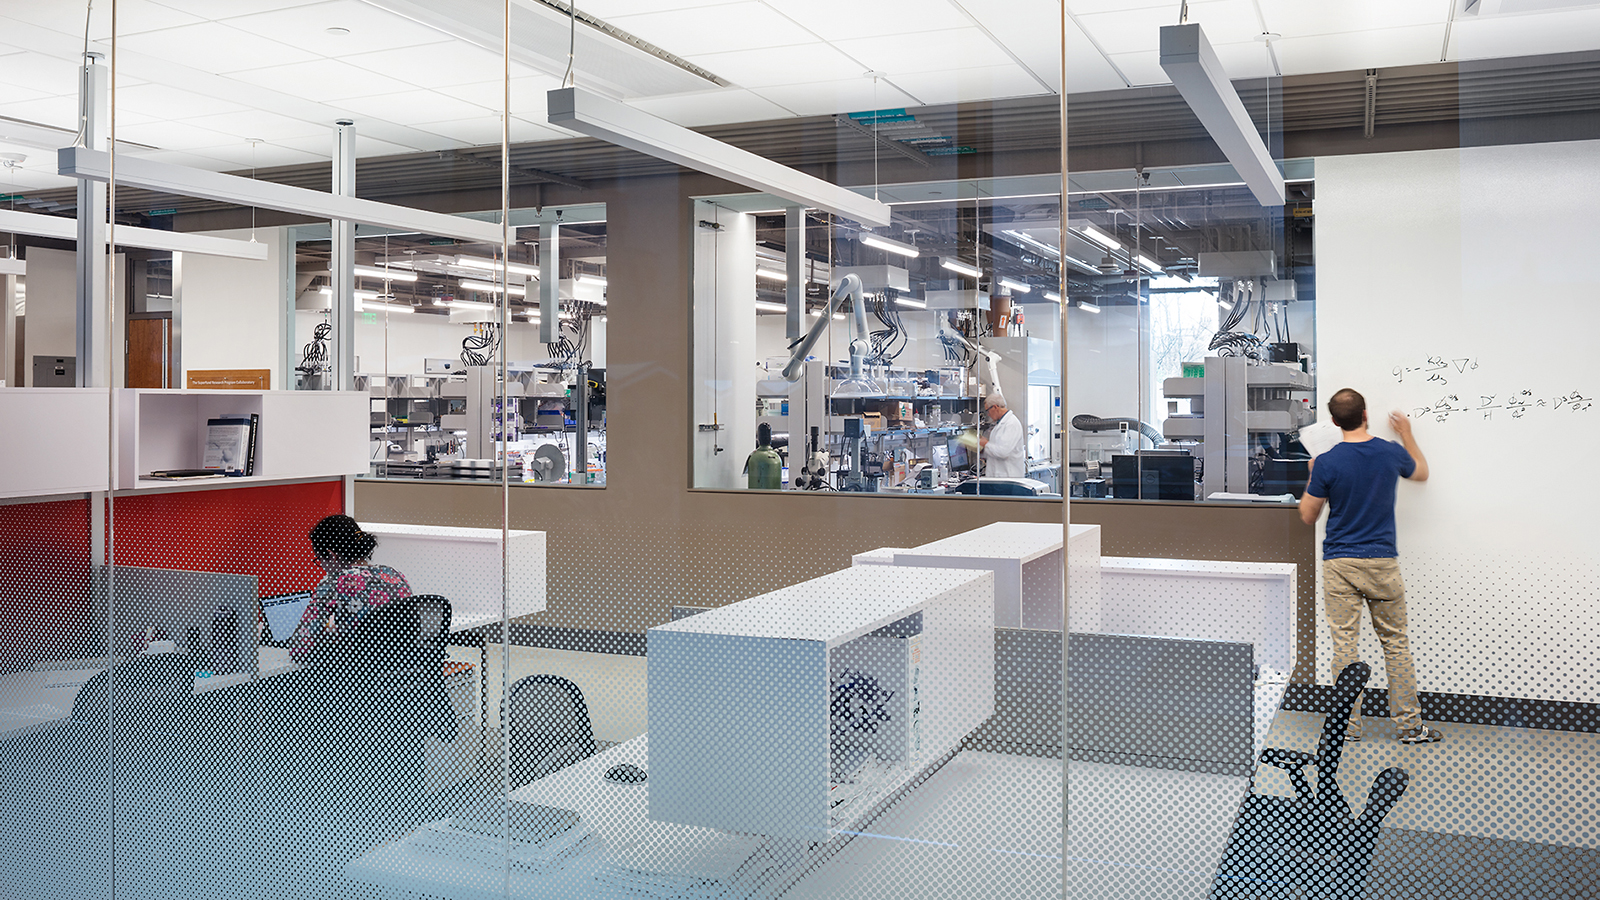 Brown University Engineering Research Center Interior, 3D printing lab